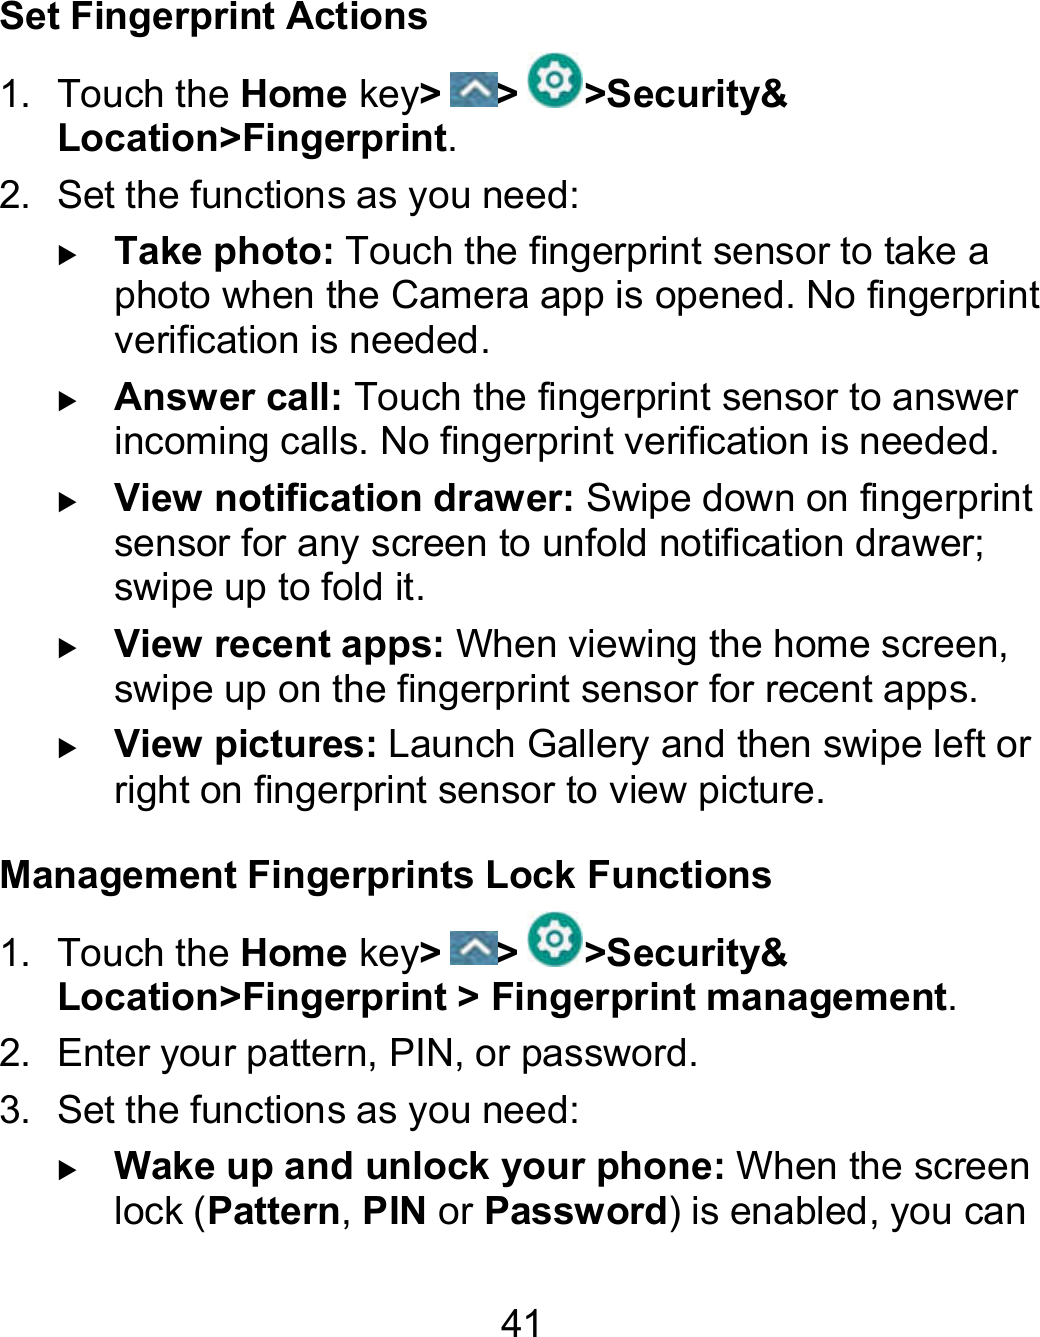 41 Set Fingerprint Actions 1.  Touch the Home key&gt; &gt; &gt;Security&amp; Location&gt;Fingerprint. 2.  Set the functions as you need:  Take photo: Touch the fingerprint sensor to take a photo when the Camera app is opened. No fingerprint verification is needed.  Answer call: Touch the fingerprint sensor to answer incoming calls. No fingerprint verification is needed.  View notification drawer: Swipe down on fingerprint sensor for any screen to unfold notification drawer; swipe up to fold it.  View recent apps: When viewing the home screen, swipe up on the fingerprint sensor for recent apps.  View pictures: Launch Gallery and then swipe left or right on fingerprint sensor to view picture. Management Fingerprints Lock Functions 1.  Touch the Home key&gt; &gt; &gt;Security&amp; Location&gt;Fingerprint &gt; Fingerprint management. 2.  Enter your pattern, PIN, or password. 3.  Set the functions as you need:  Wake up and unlock your phone: When the screen lock (Pattern, PIN or Password) is enabled, you can 